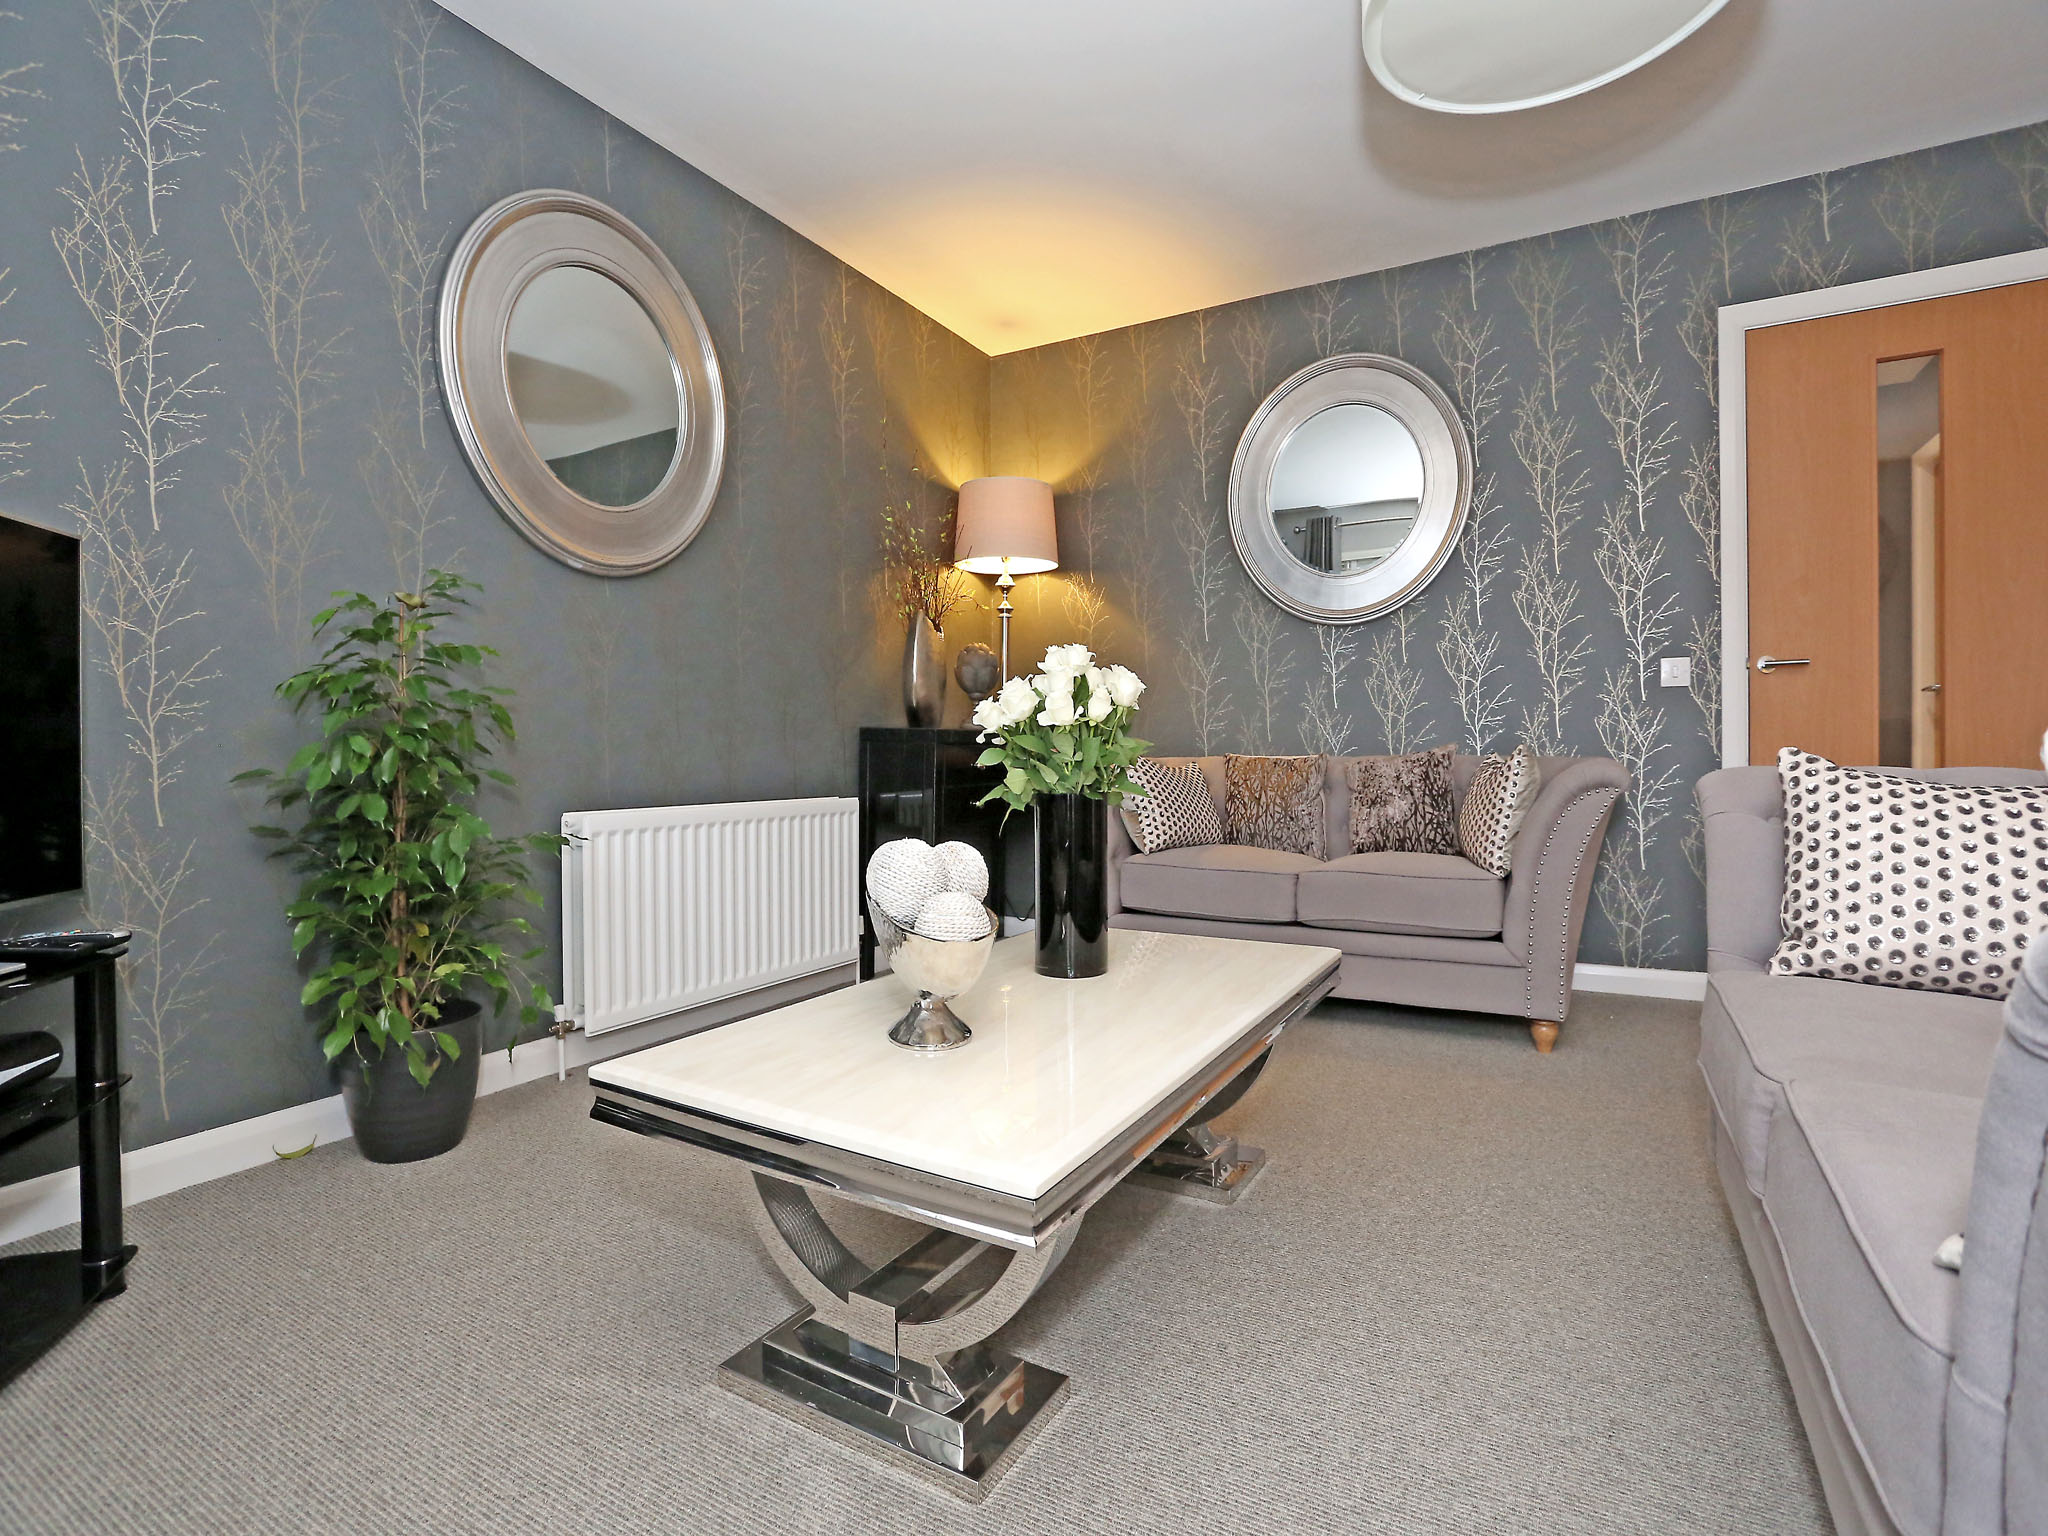 Property Image 1 - Comfortable Inverurie home close to train station